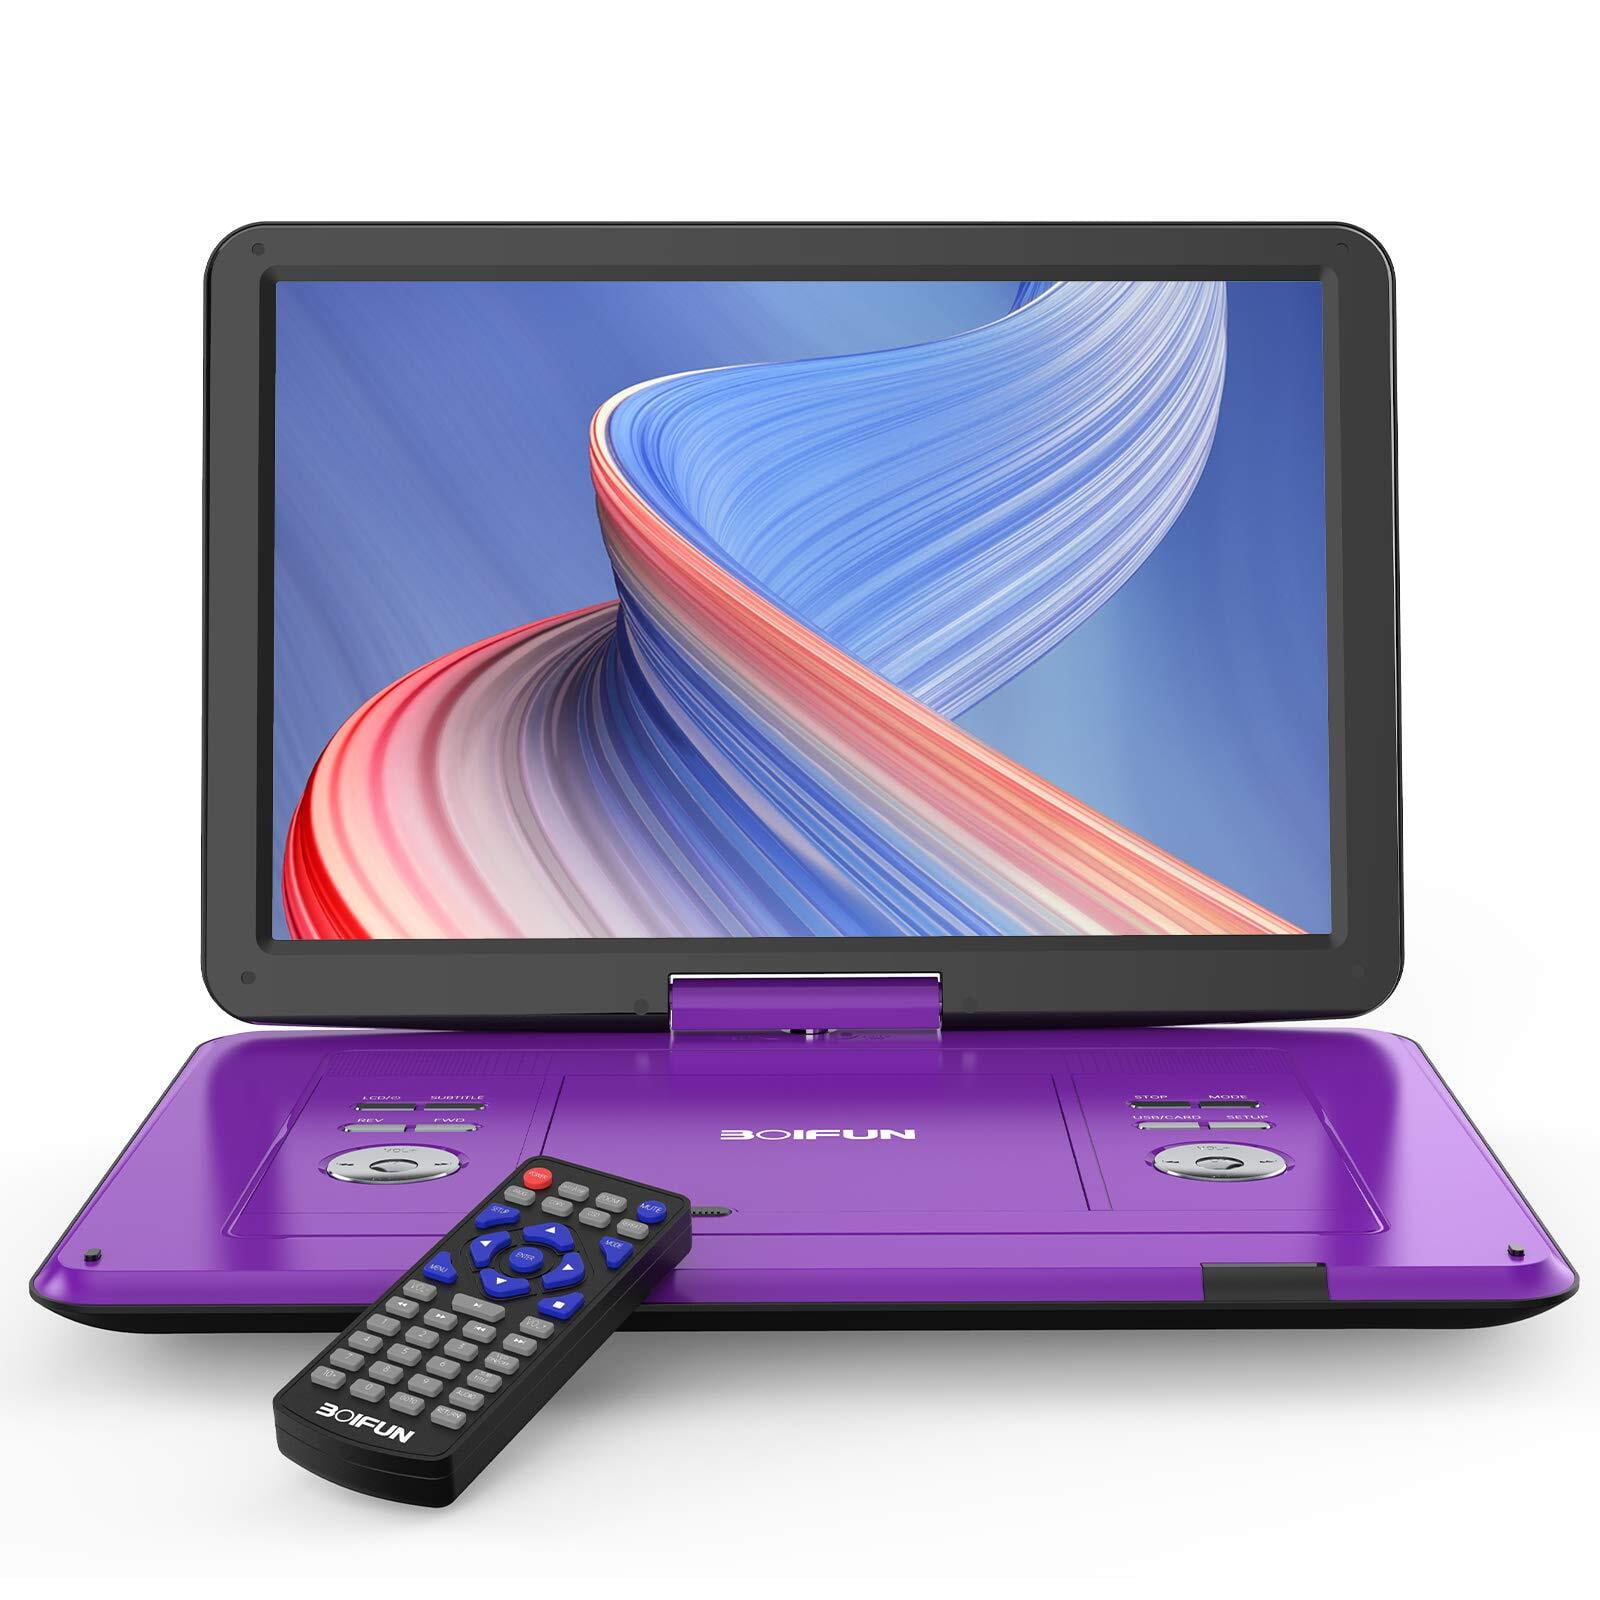 BOIFUN Portable DVD Player with 15.6 Large HD Screen, 6 Hours Rechargeable  Battery, Support USB/SD Card/Sync TV and Multiple Disc Formats,Car Dvd